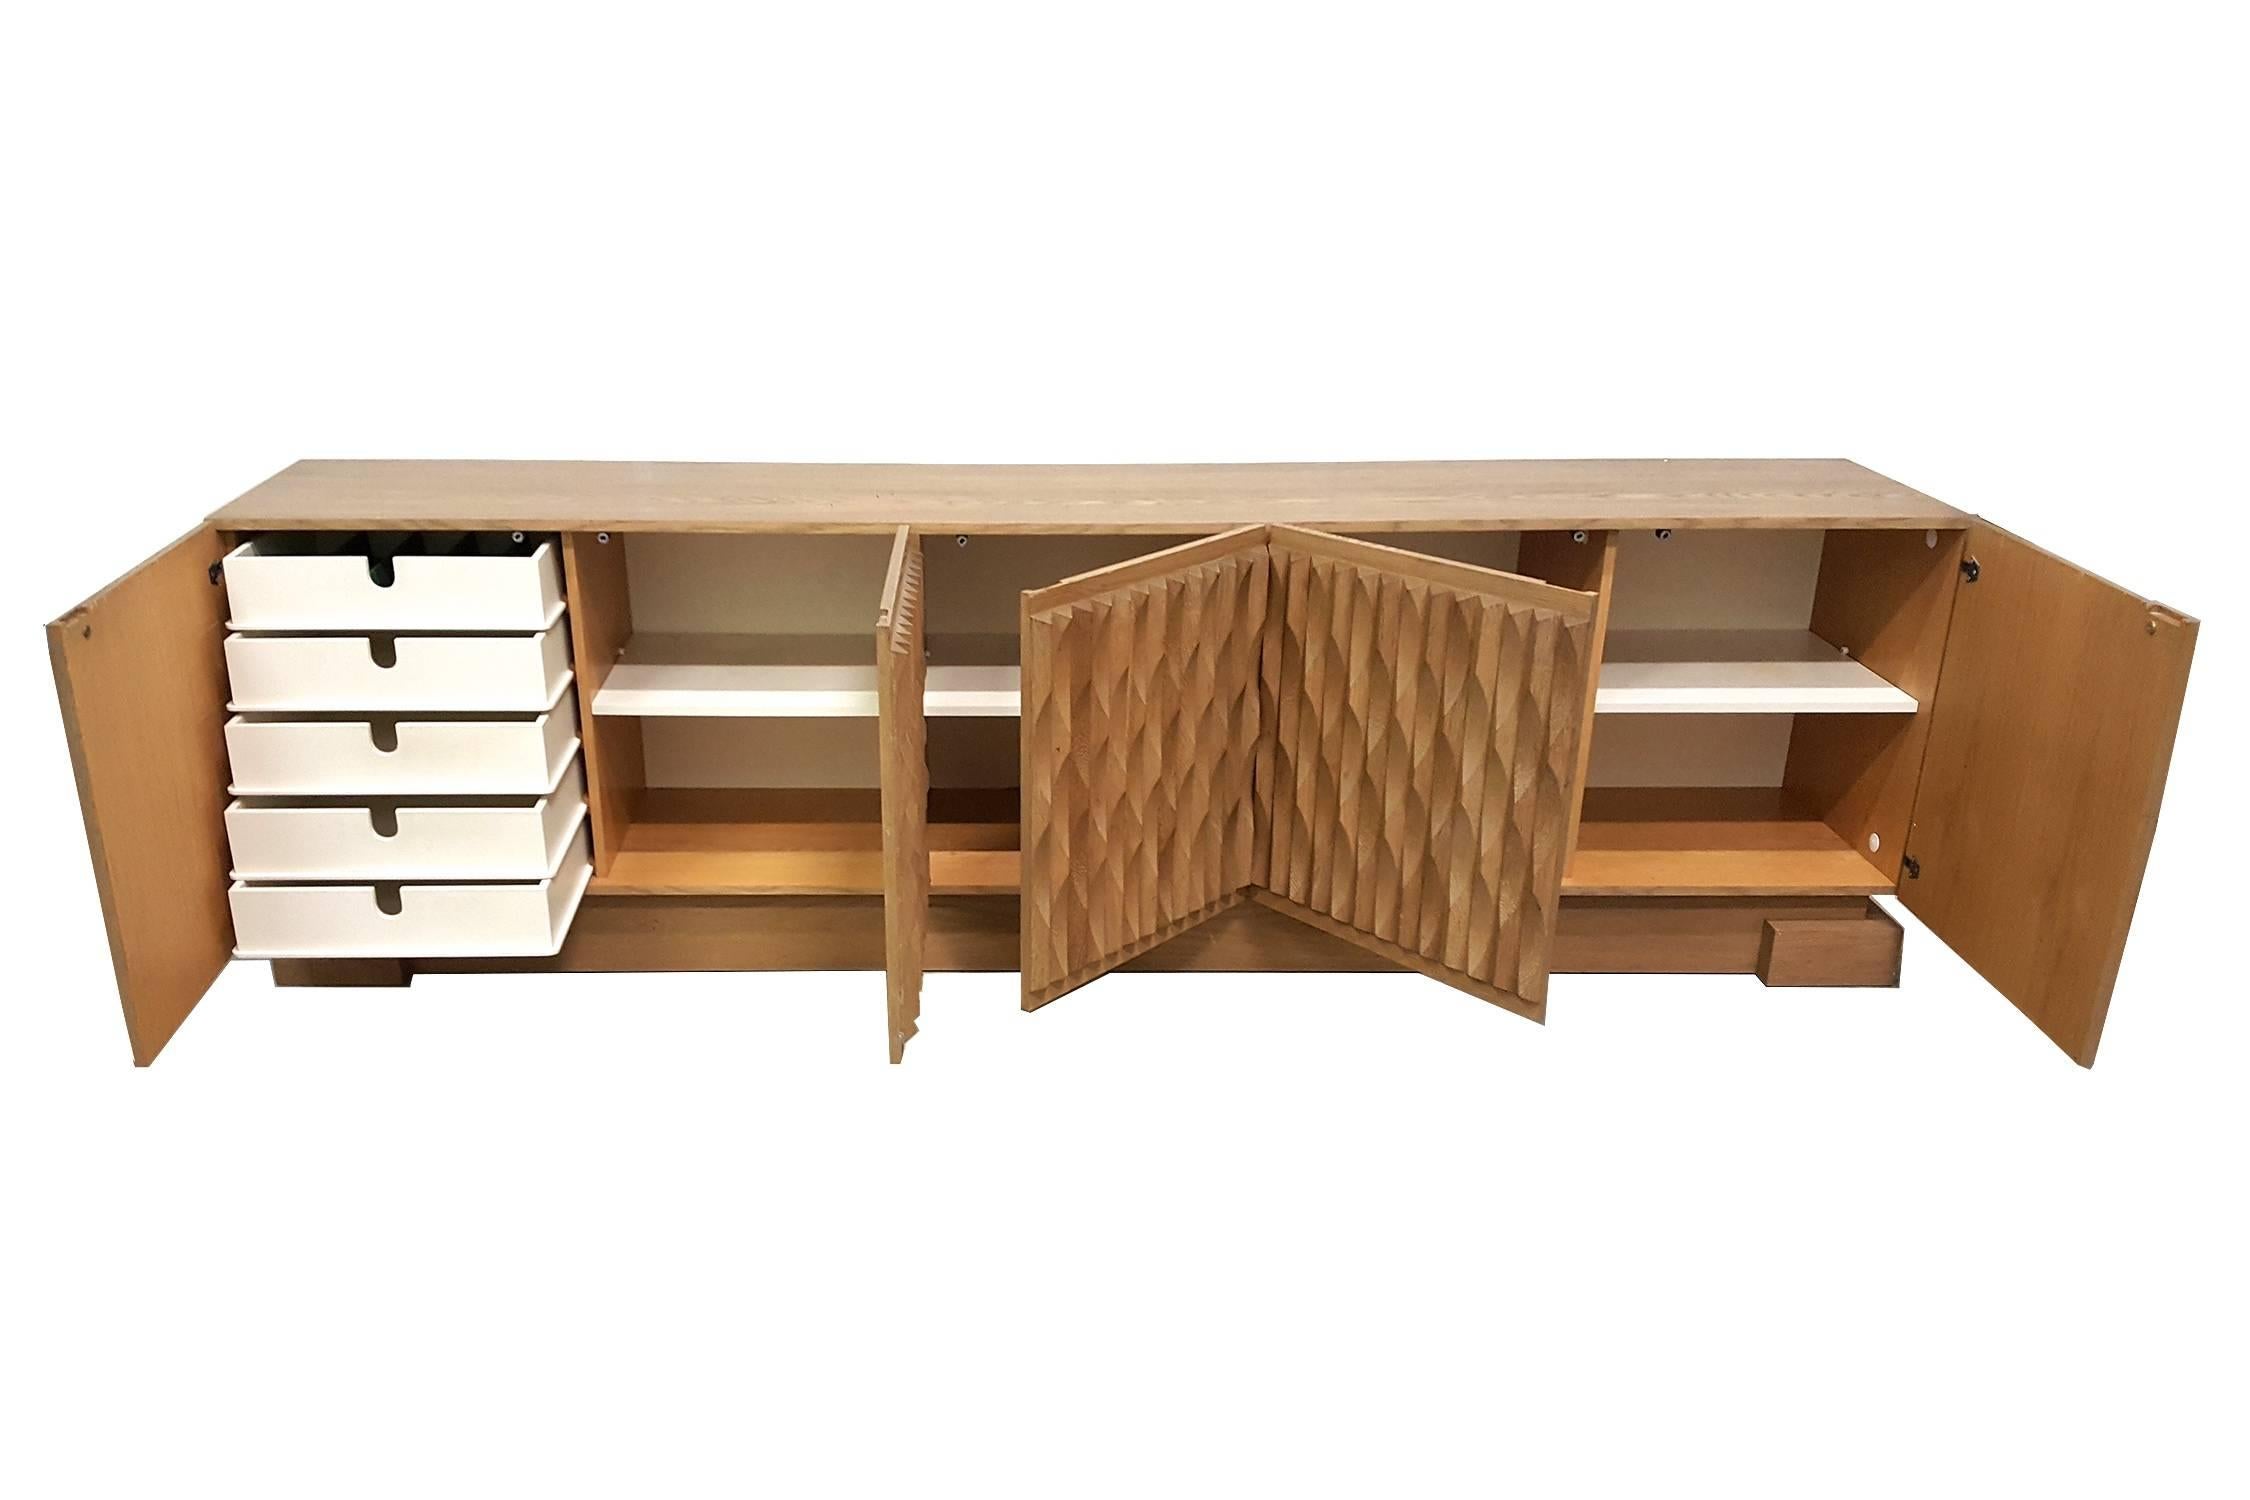 This five-door geometric sideboard is the best in its kind,
continuous wavy patterns on the door panels.
Brutalist and natural rawness.
Continental European, 1970s.
Measures: L 260 cm, H 75 cm, D 47 cm.